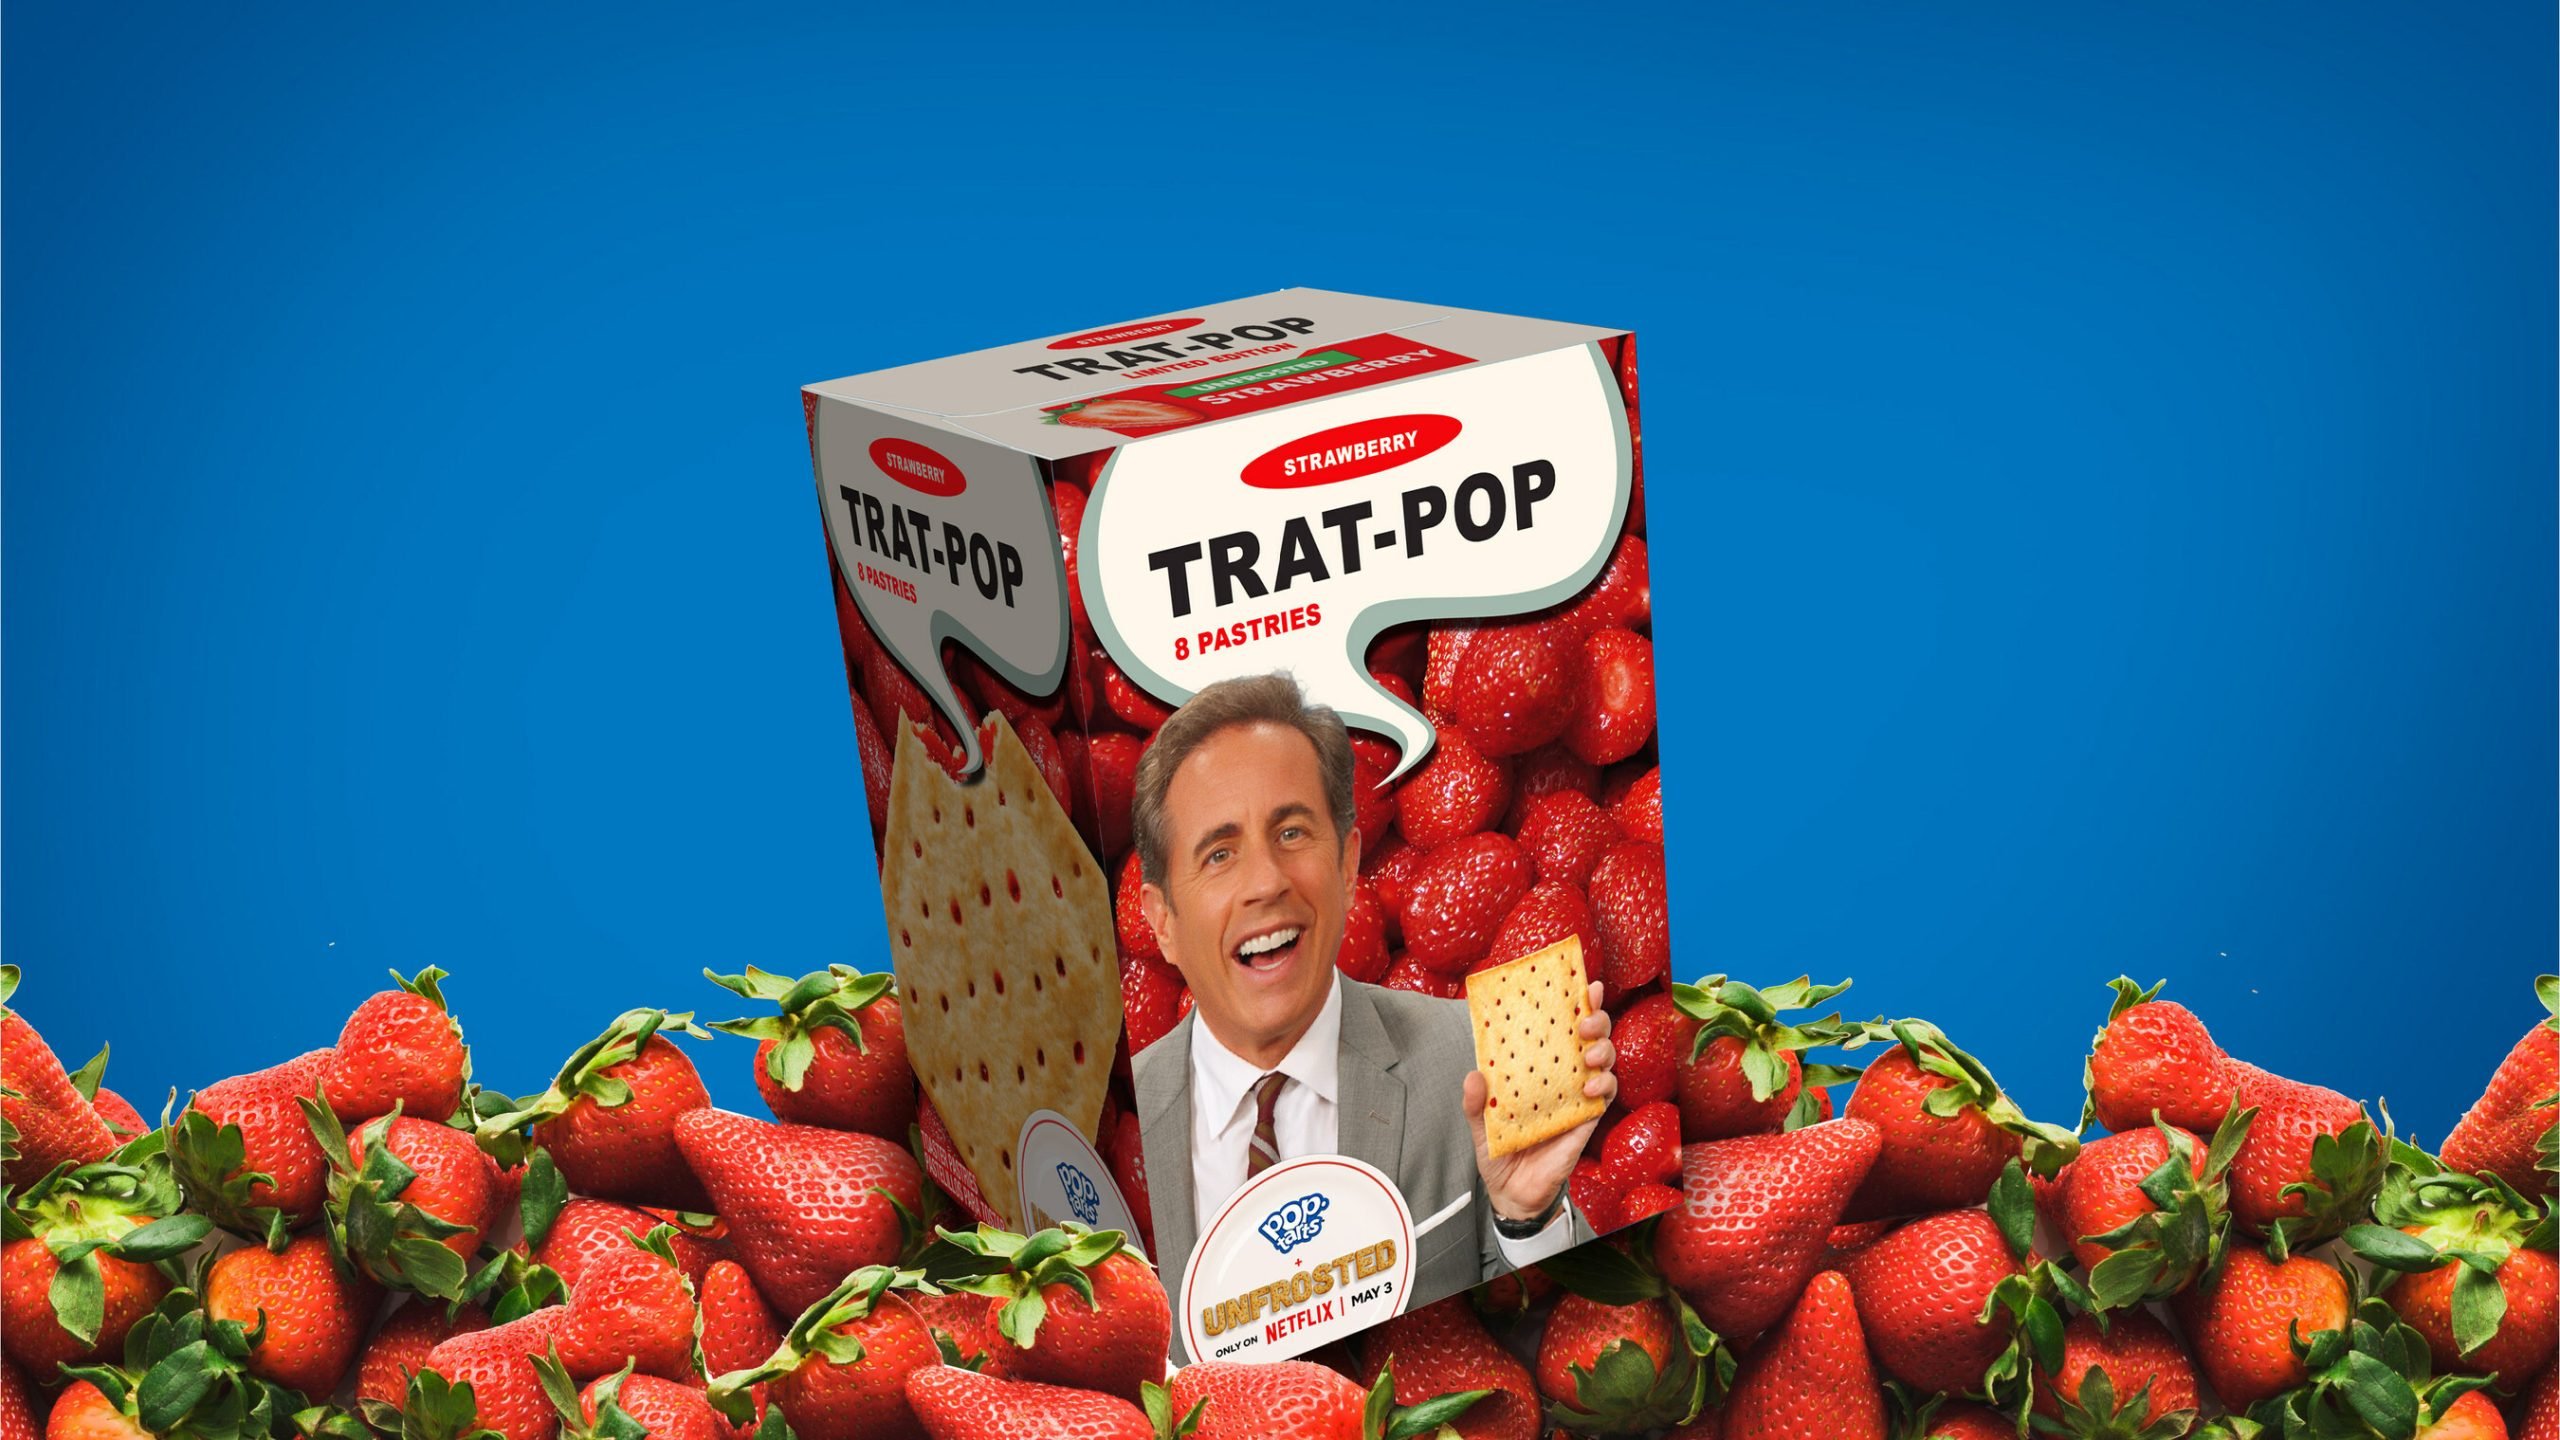 What’s the Deal With All These Pop-Tarts Boxes With Jerry Seinfeld’s Face on Them?